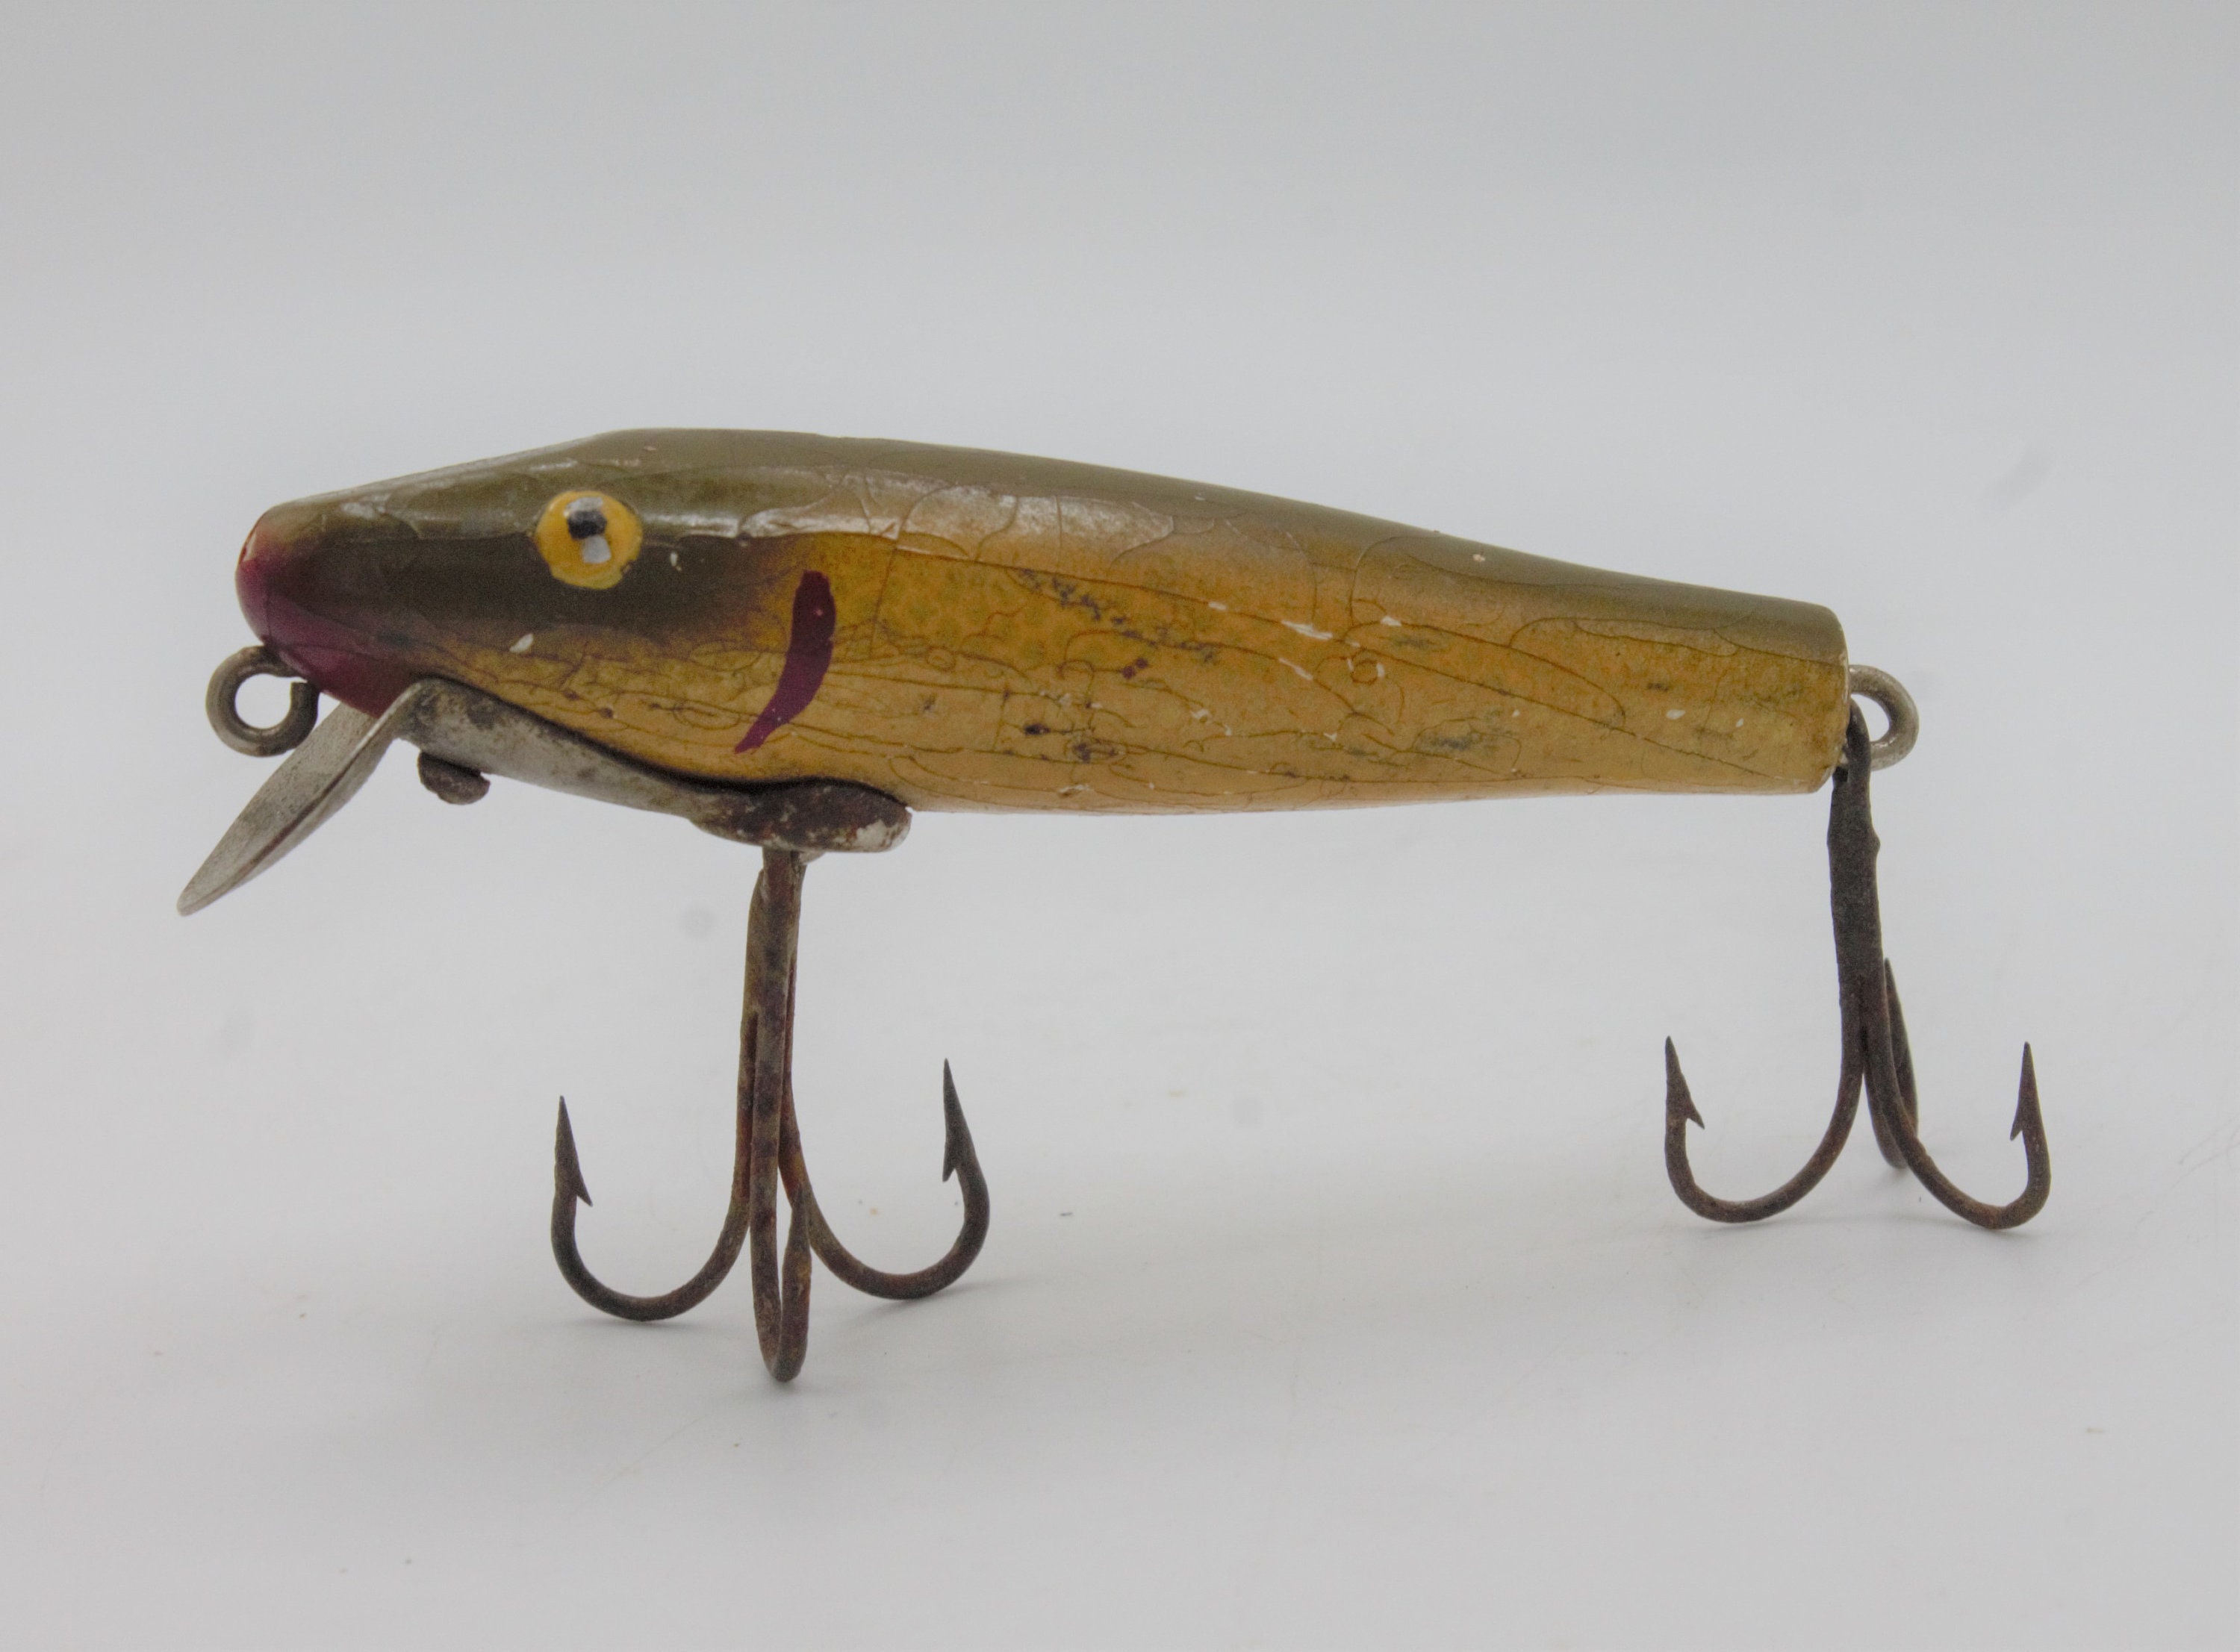 Vintage Fishing Lure 1950s Wooden Hand Painted Body Soft Jerkbait